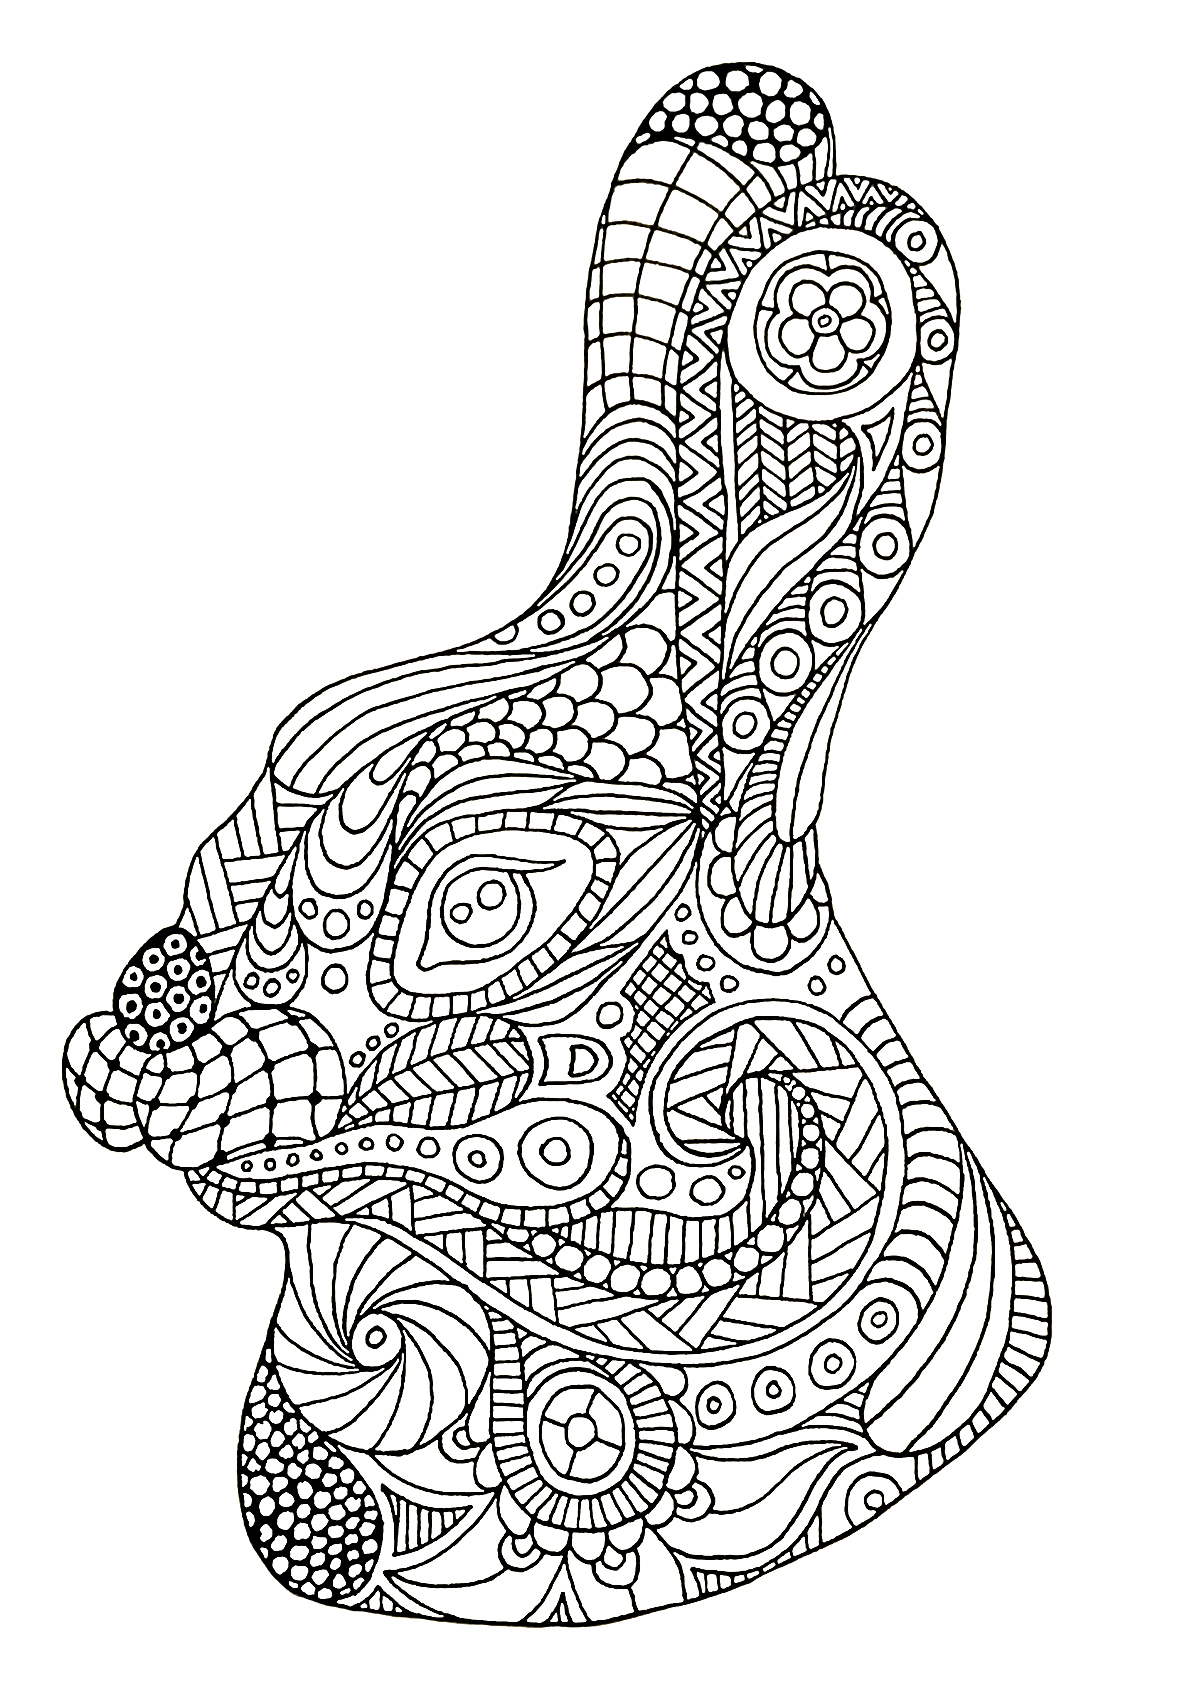 Rabbit head drawn with Zentangle style, Artist : Lucie